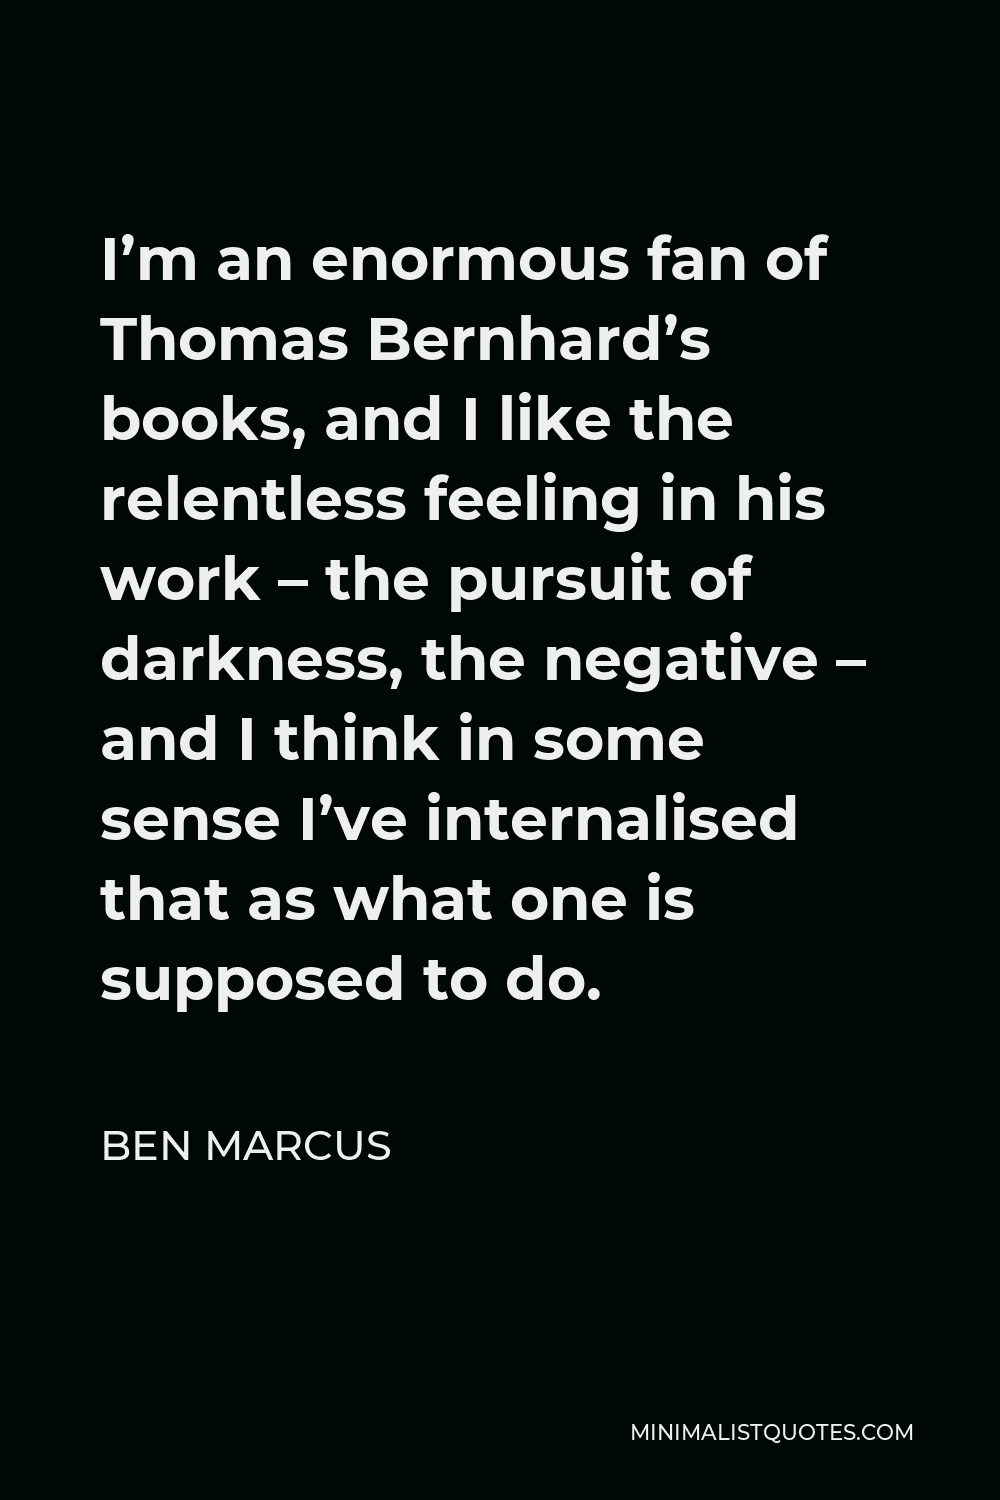 Ben Marcus Quote - I’m an enormous fan of Thomas Bernhard’s books, and I like the relentless feeling in his work – the pursuit of darkness, the negative – and I think in some sense I’ve internalised that as what one is supposed to do.